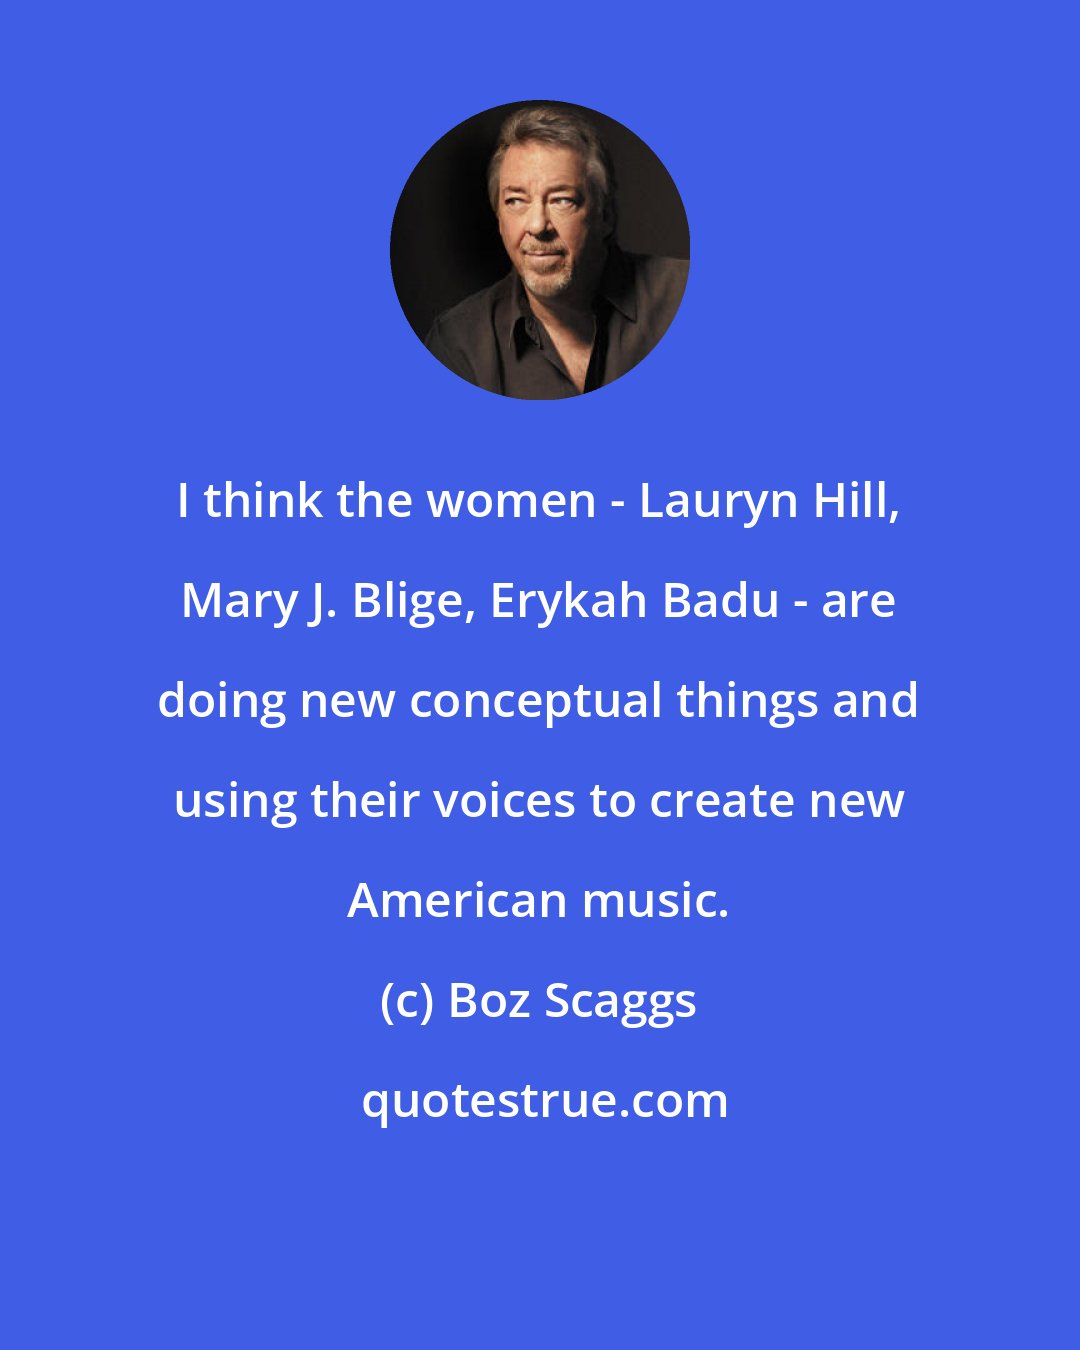 Boz Scaggs: I think the women - Lauryn Hill, Mary J. Blige, Erykah Badu - are doing new conceptual things and using their voices to create new American music.